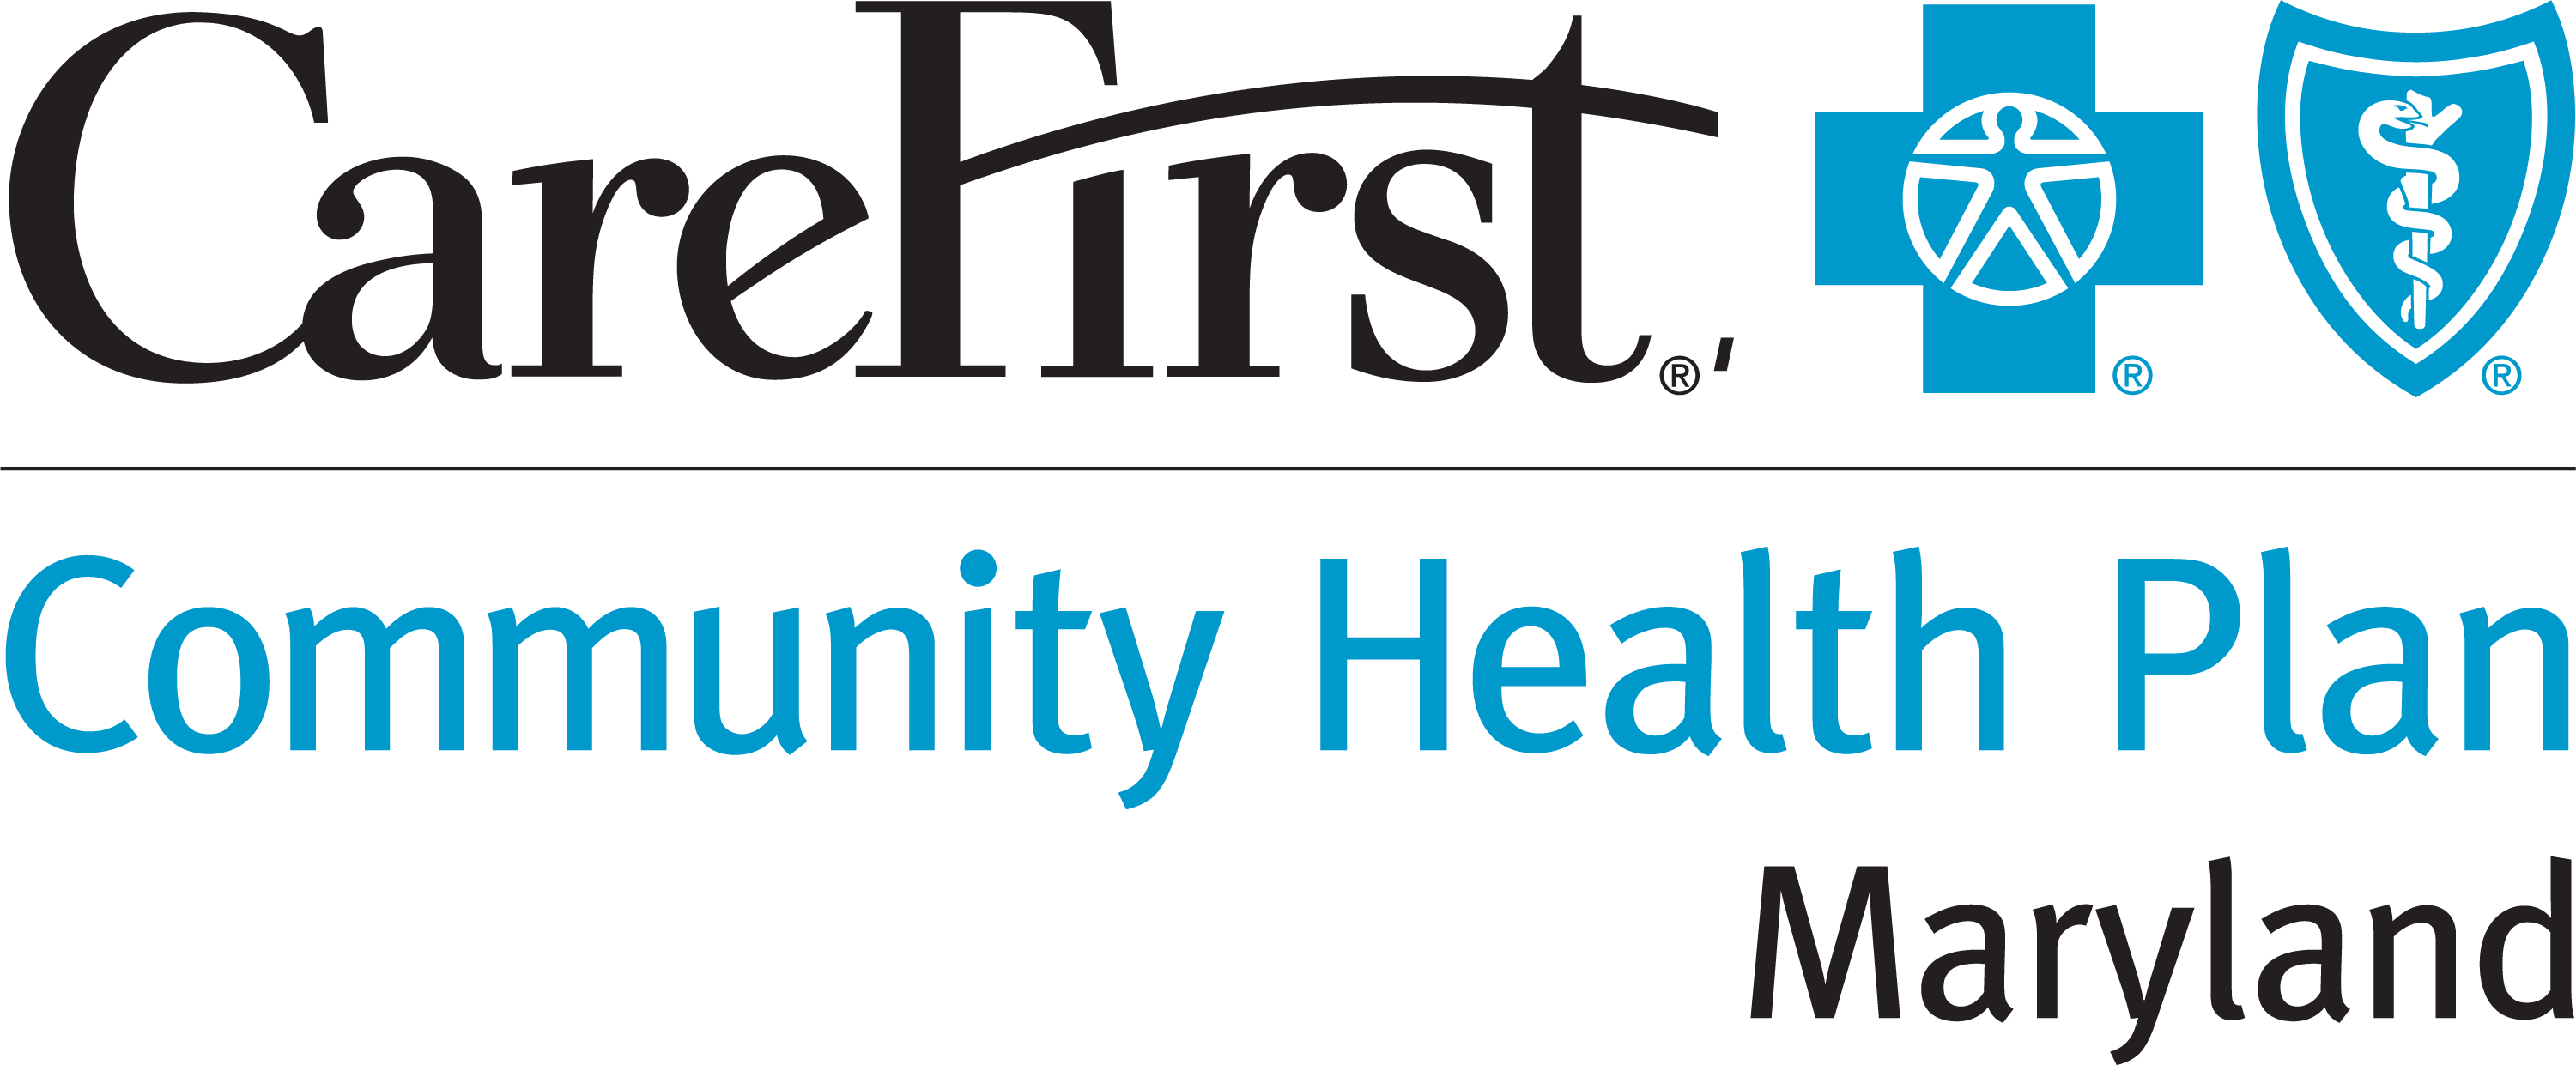 For Members | CareFirst Community Health Plan Maryland